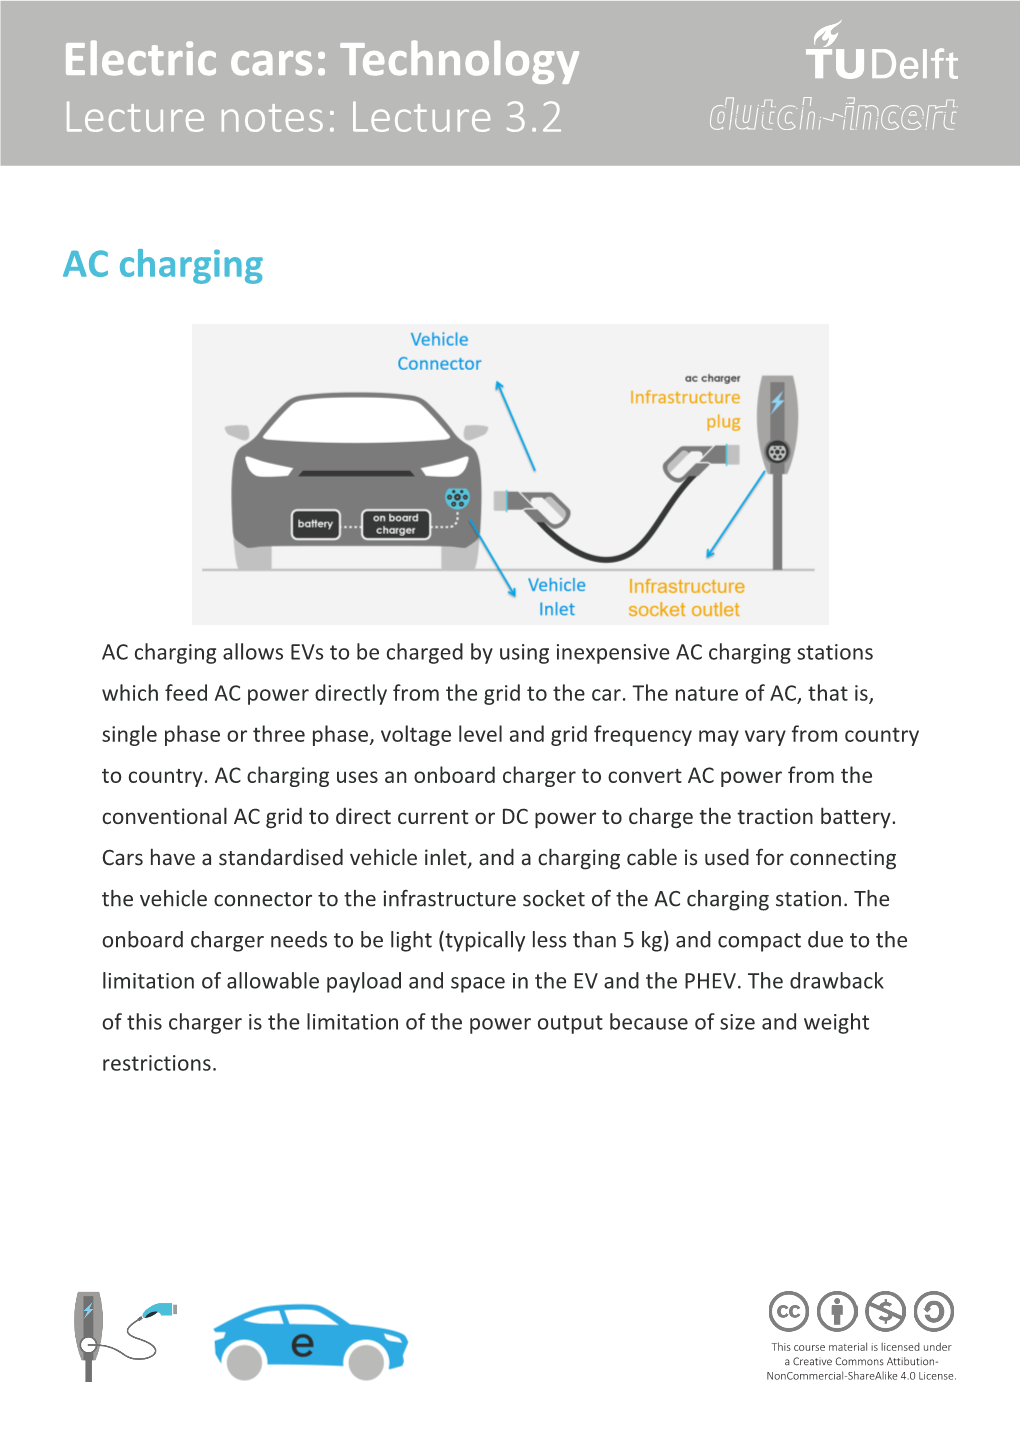 Electric Cars: Technology Lecture Notes: Lecture 3.2